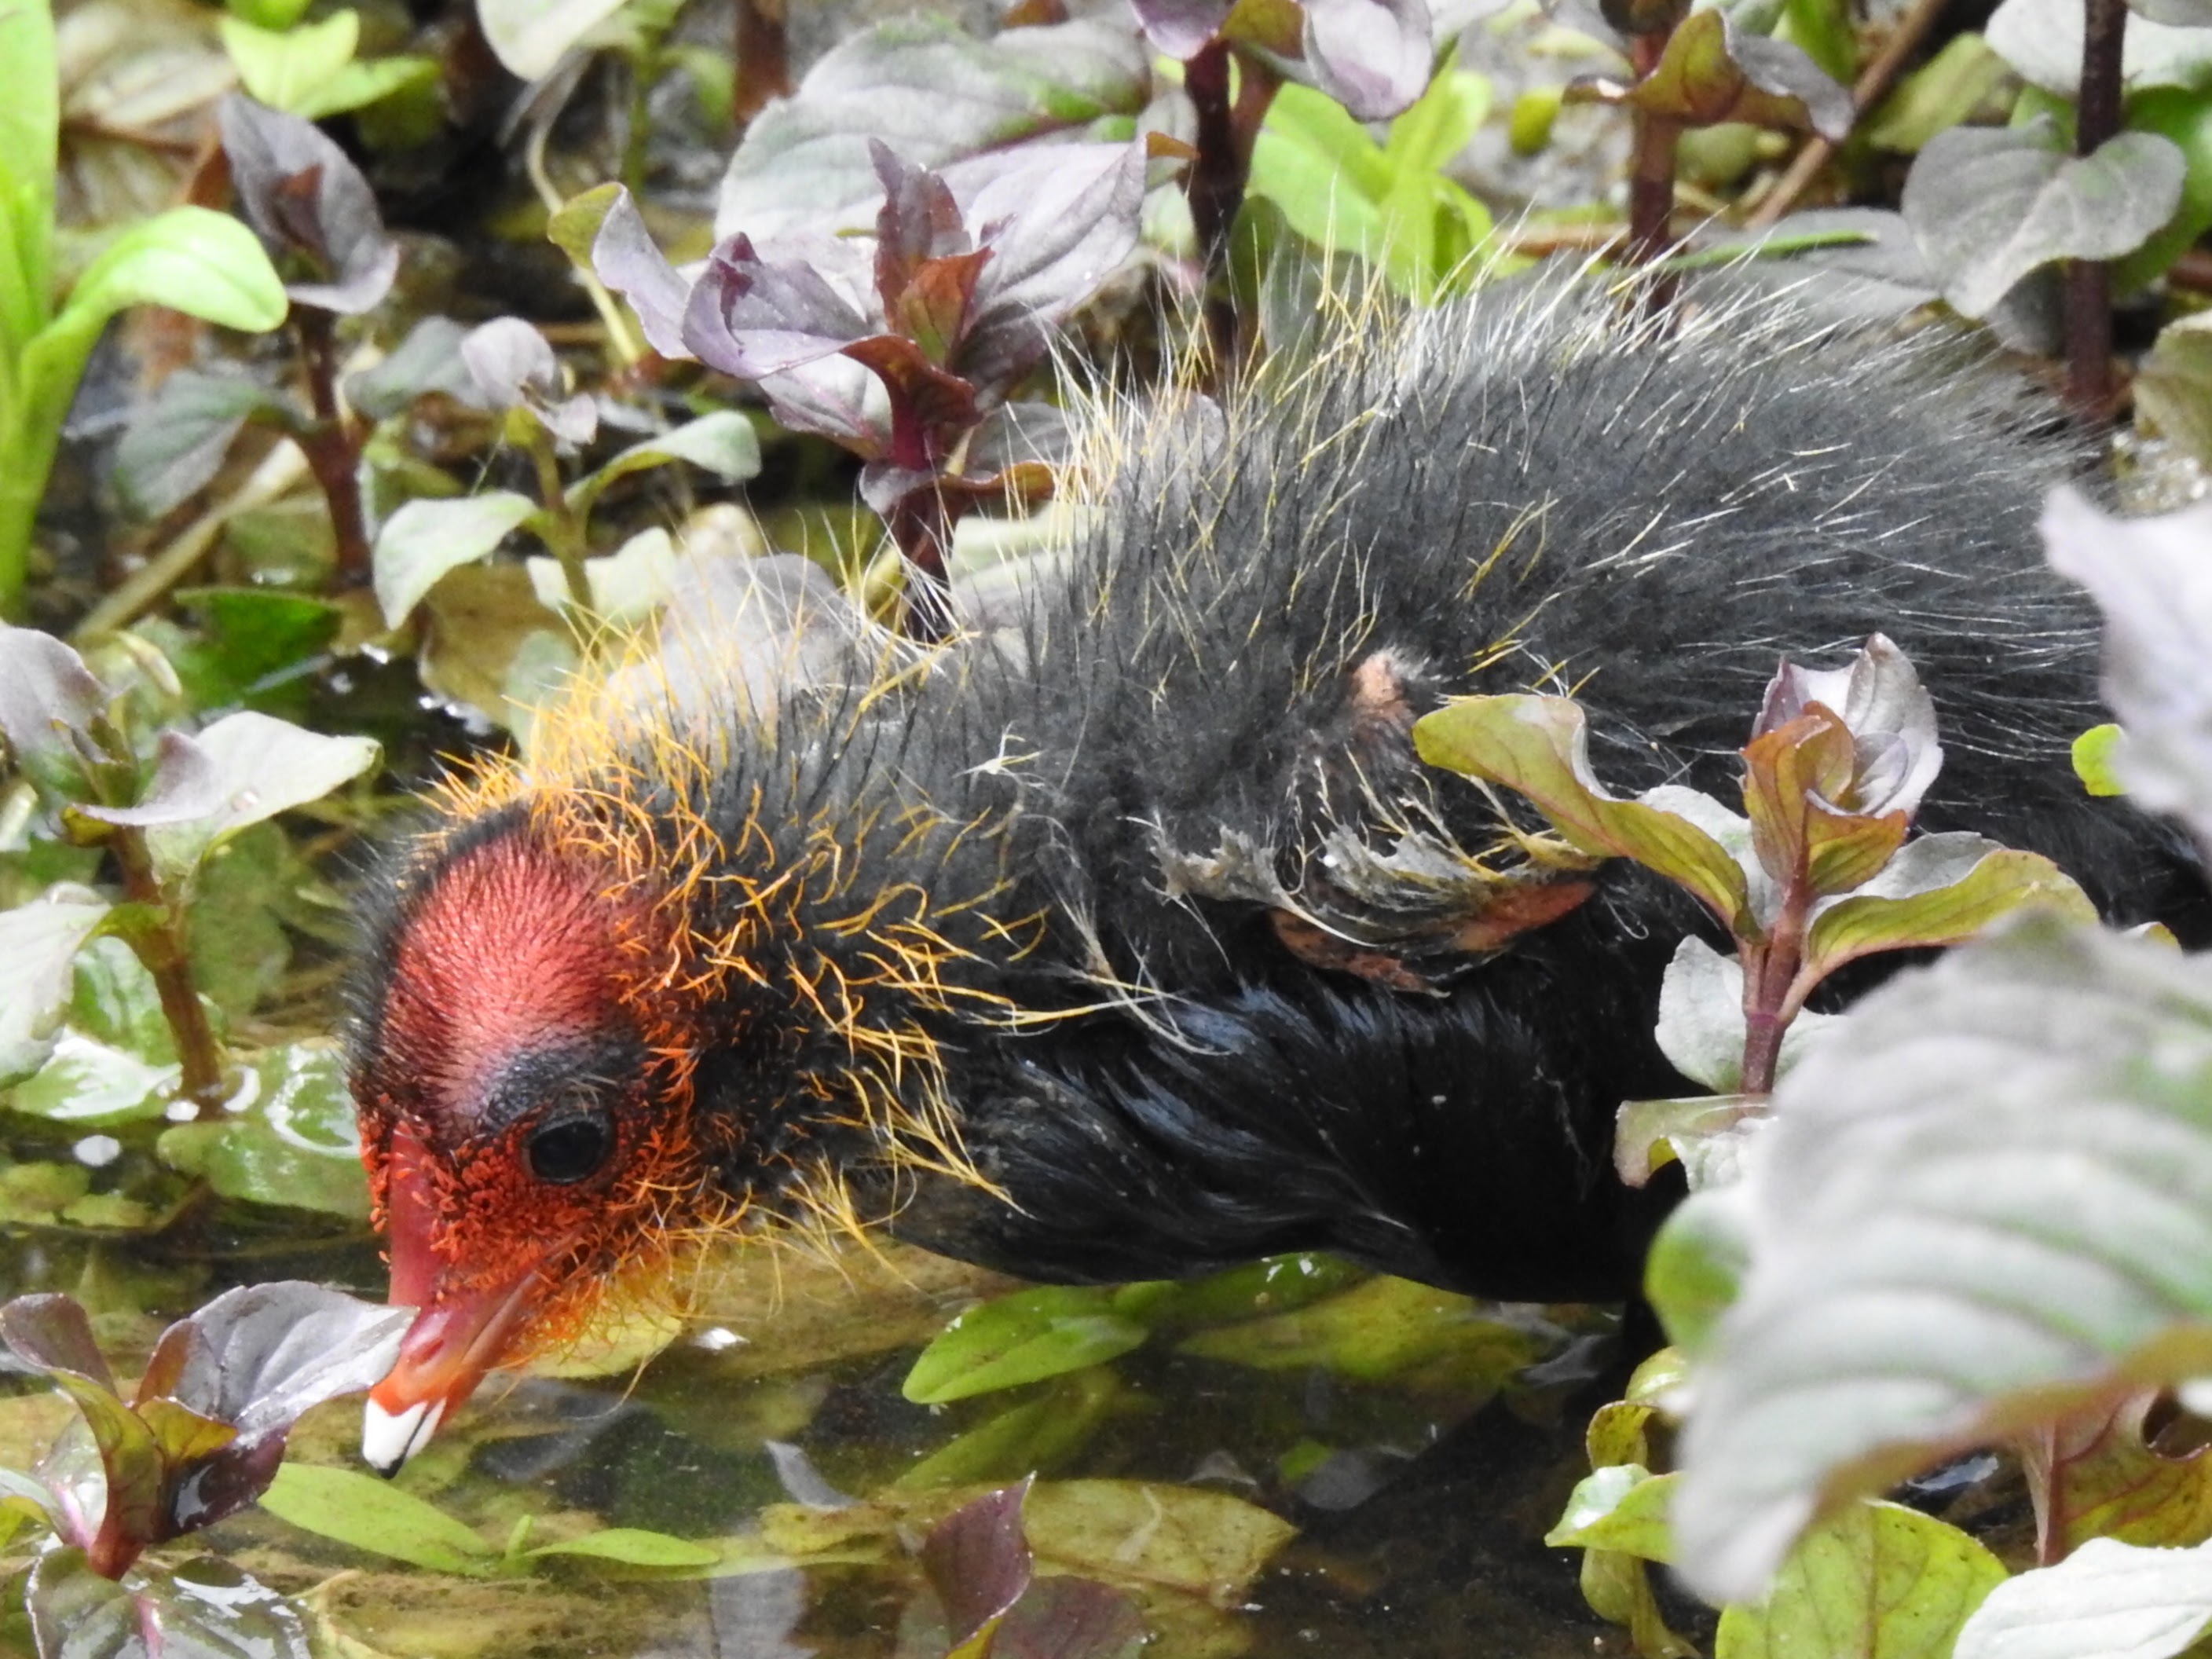 Coot chick.